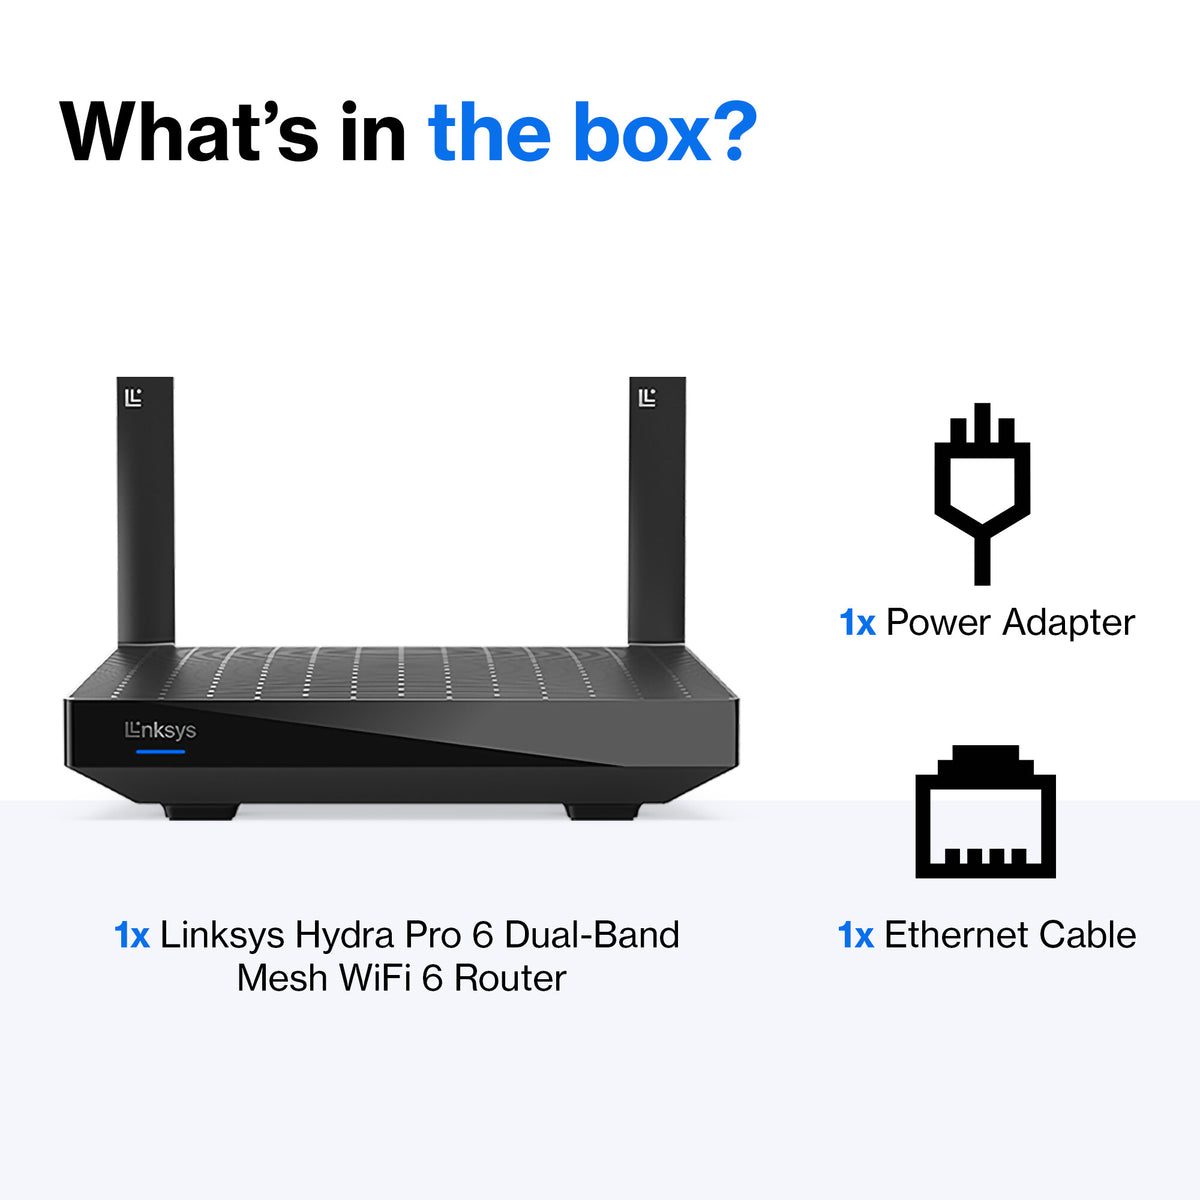 Linksys Hydra Pro 6 - Dual-band (2.4 GHz / 5 GHz) wireless router in Black